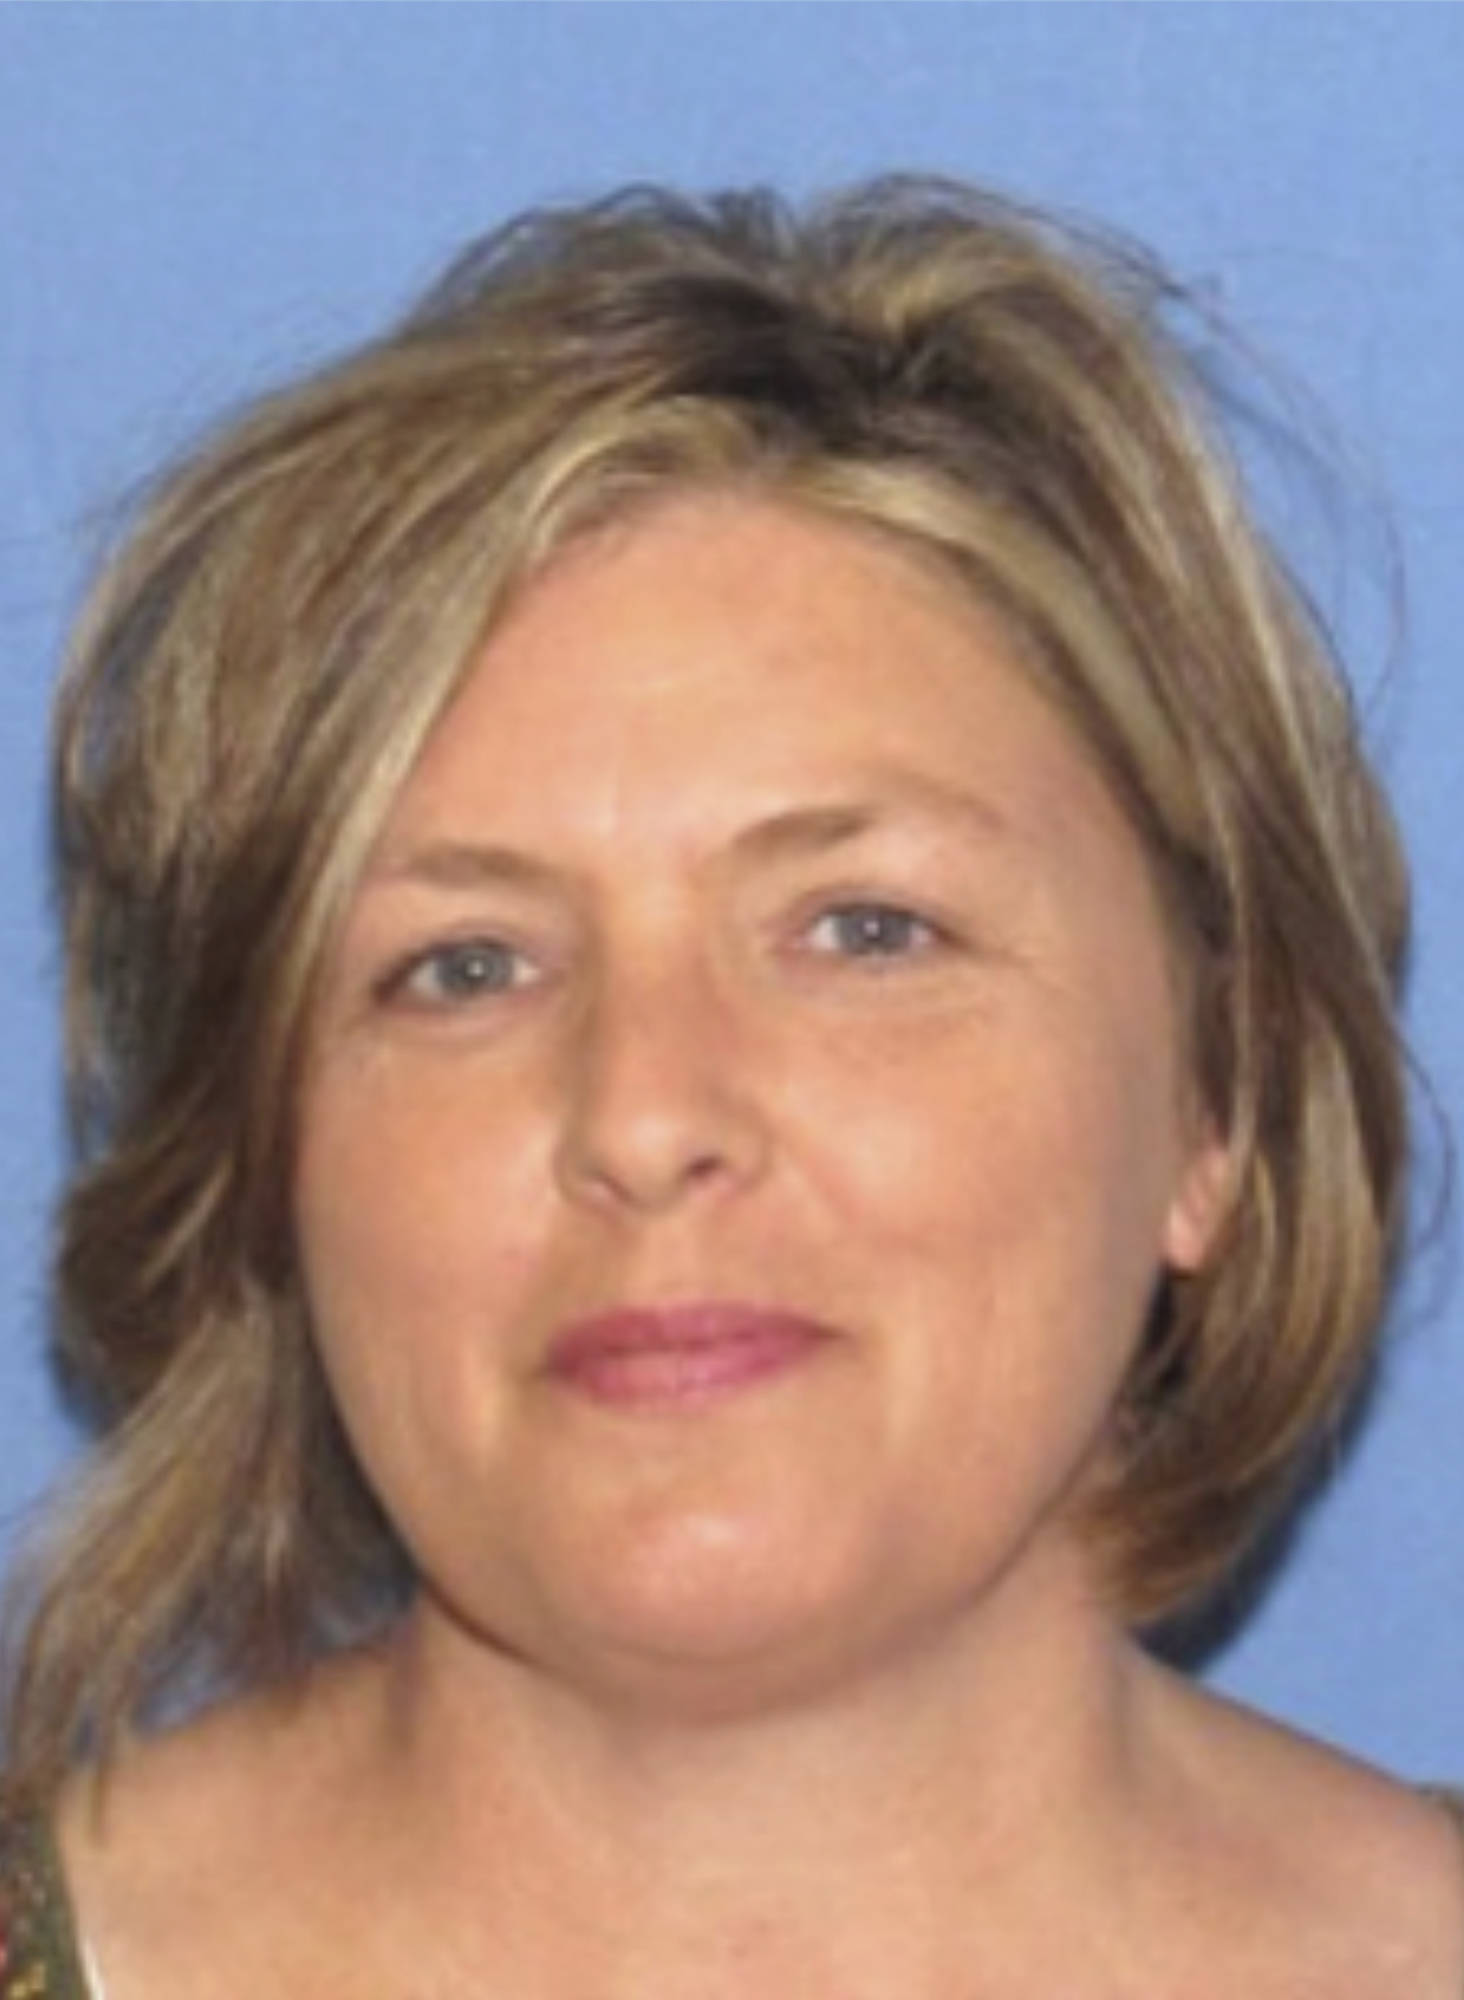 This undated images released by the Ohio Attorney General’s office, shows Angela Wagner, one of four family members that has been arrested in the slayings of eight members of one family in rural Ohio two years ago, authorities announced Tuesday, Nov. 13, 2018. (Ohio Attorney General’s office via AP)